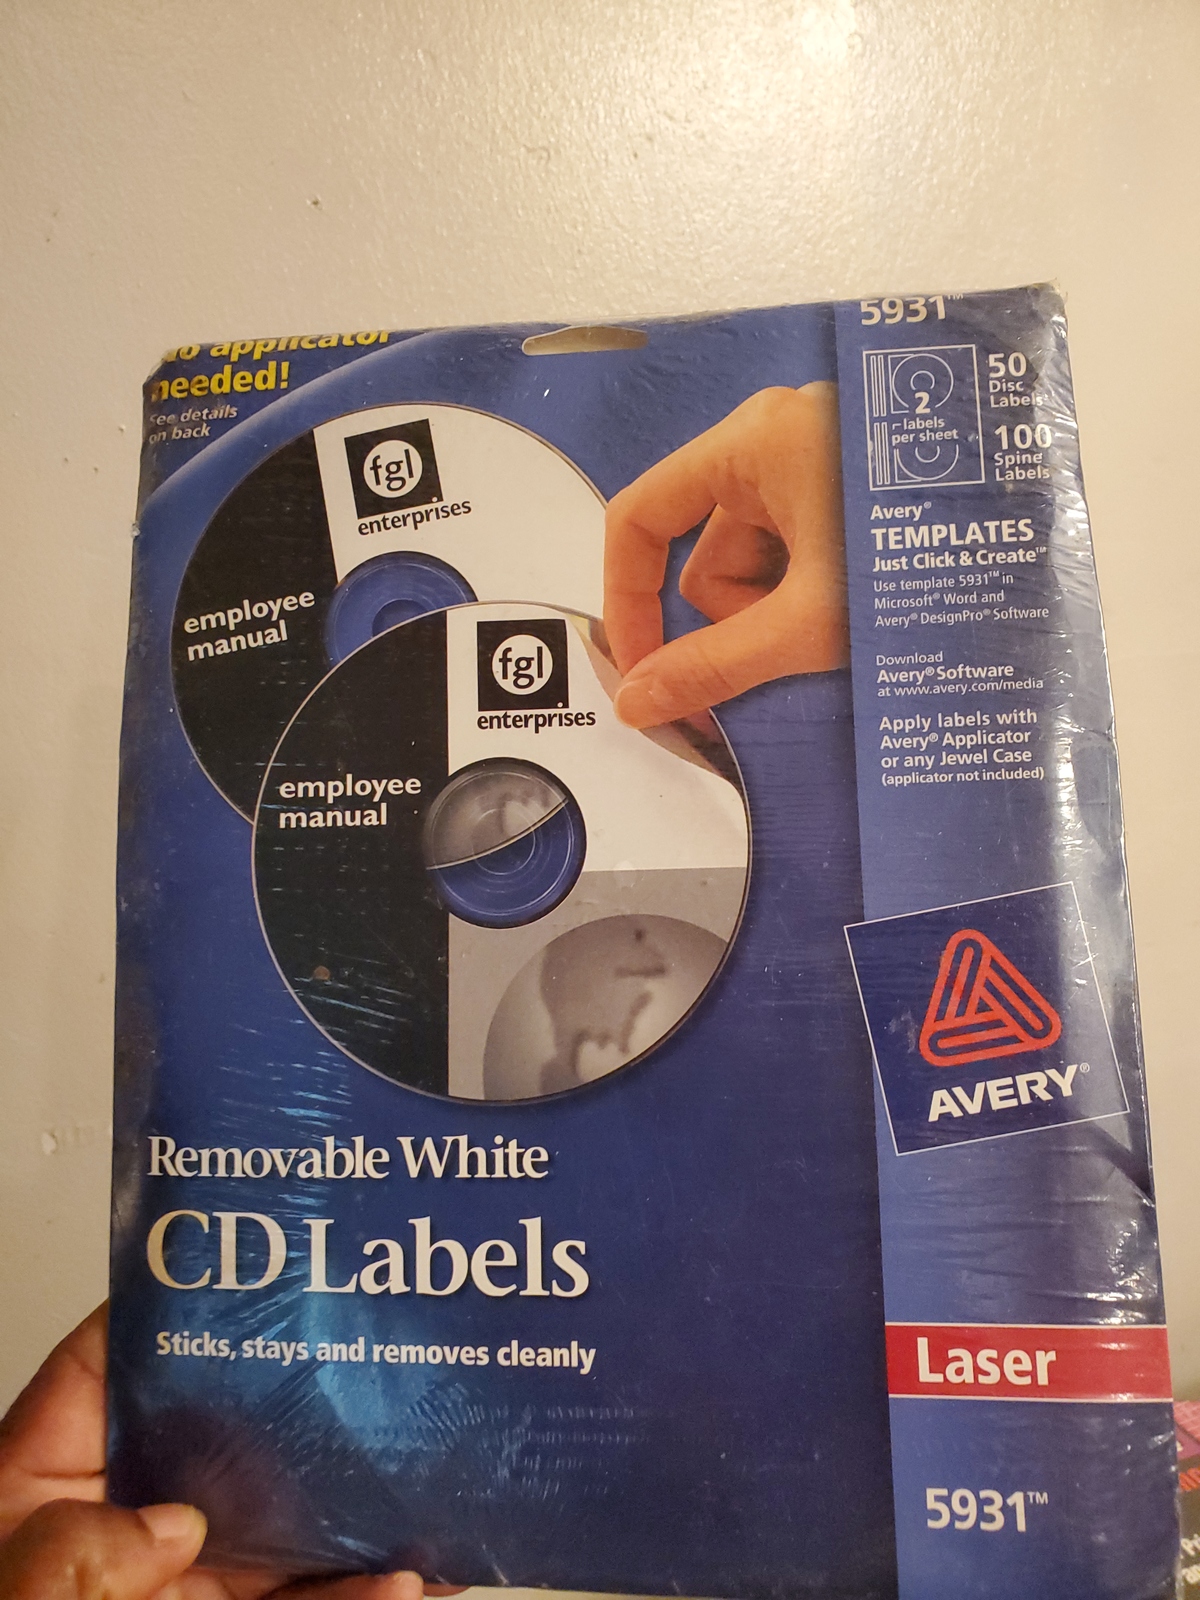 Avery 5931 Removable CD Labels: Sticks, Stays and removes cleanly - $16.99